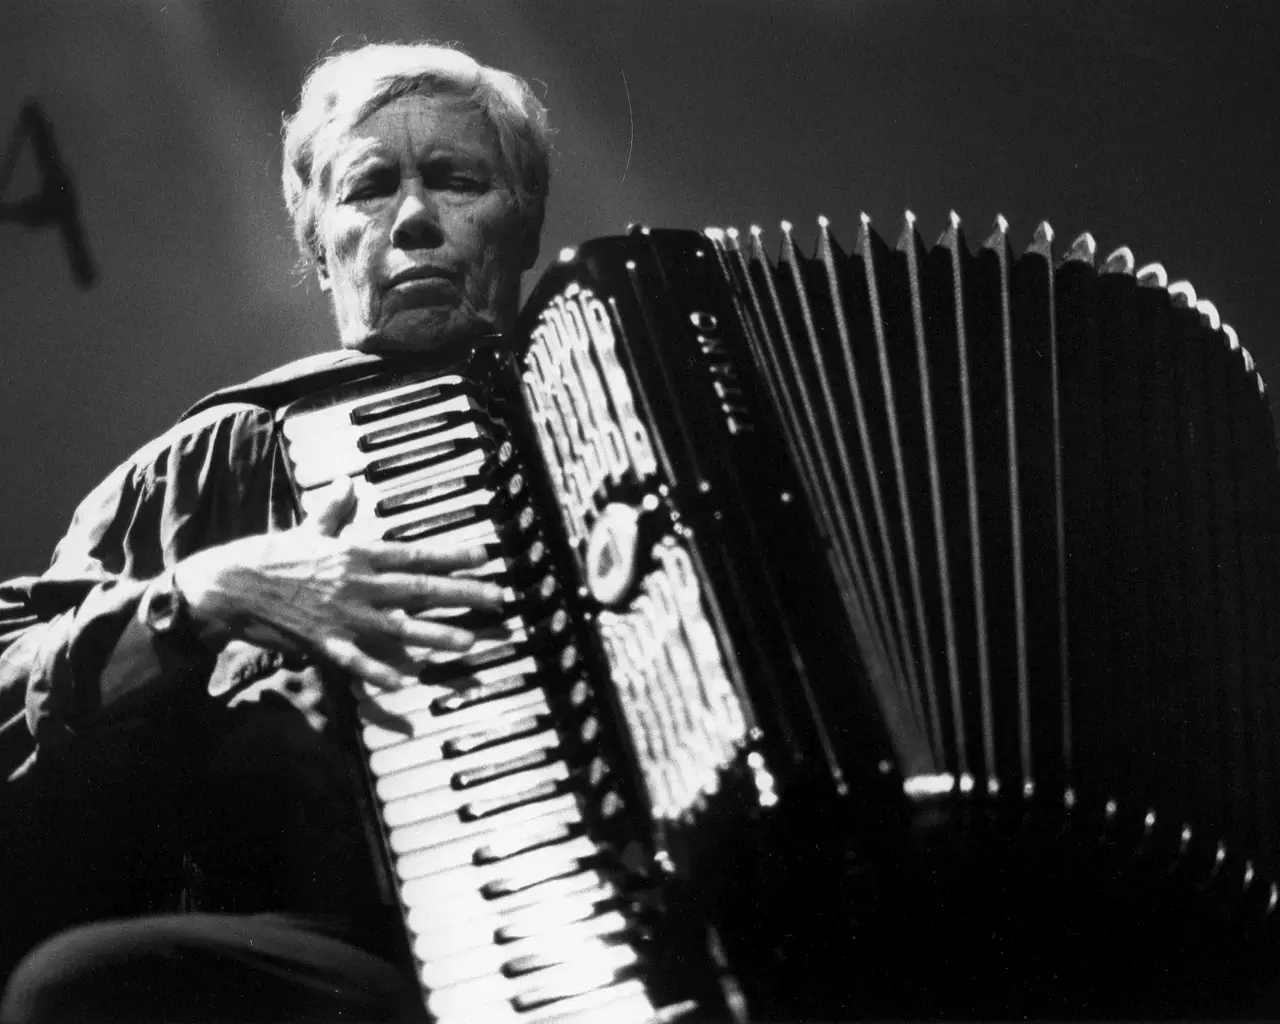 Pauline Oliveros. Photo by Pieter Kers.